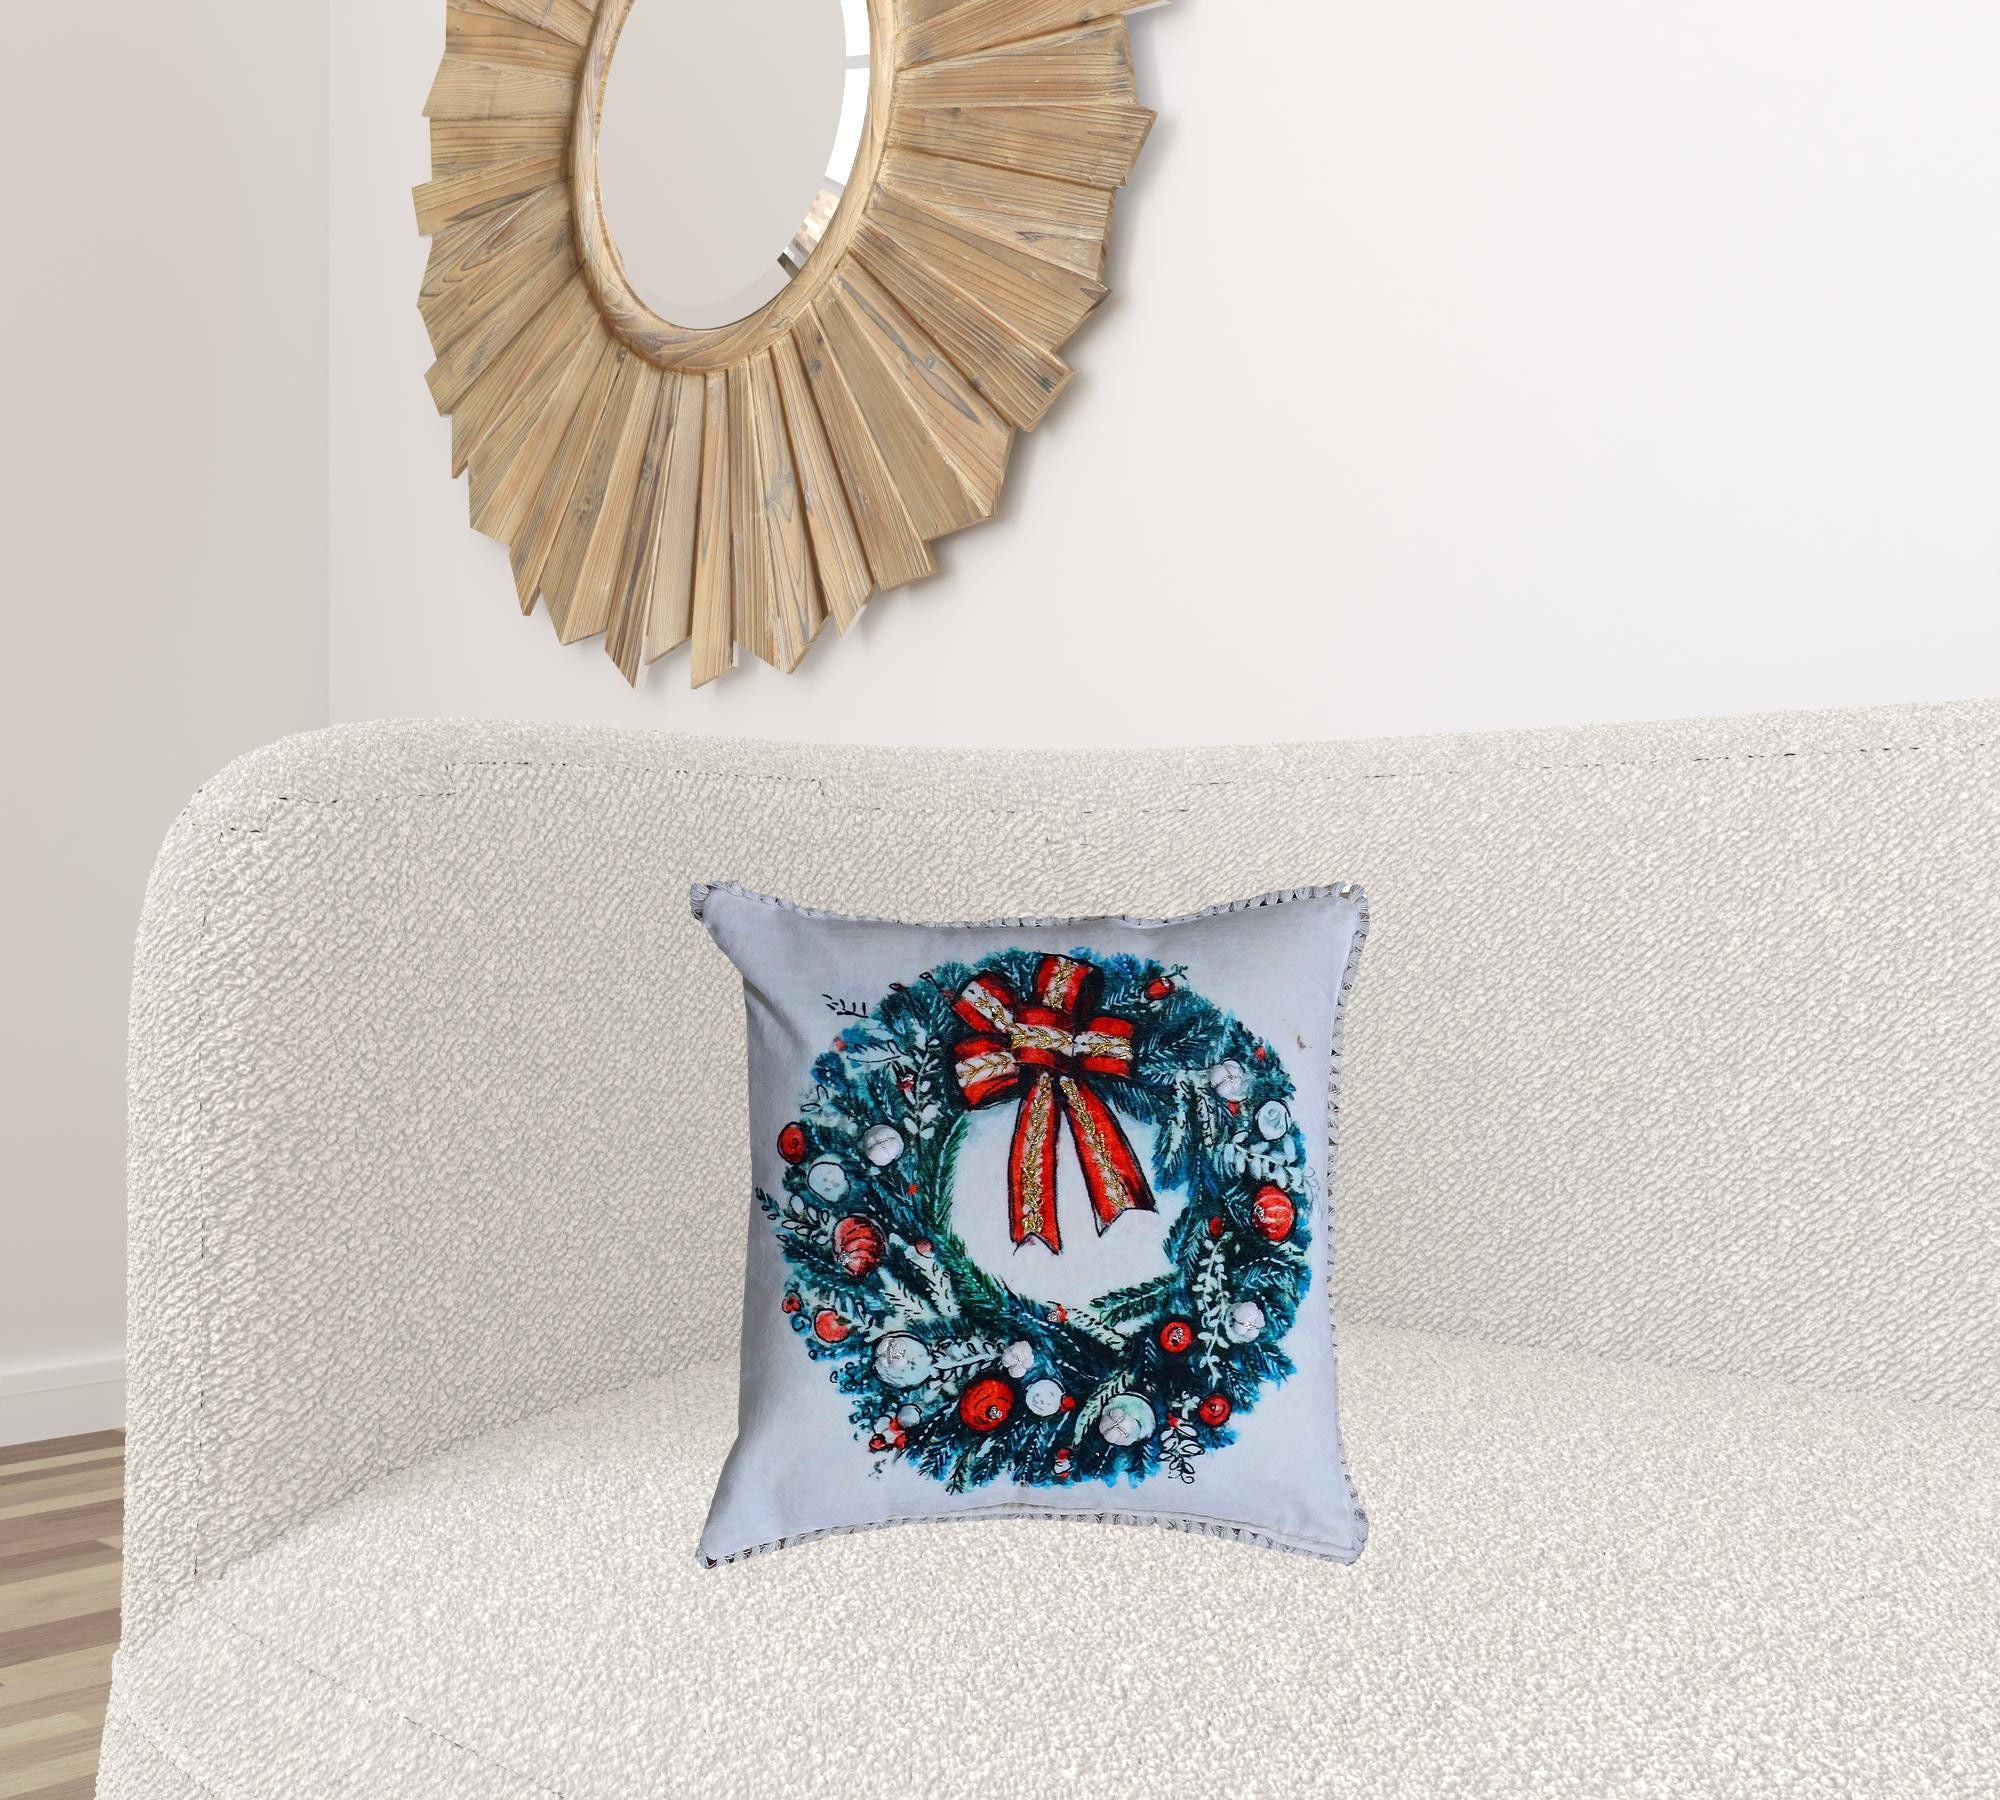 18"Lx18"D Christmas Wreath Throw Pillow With Embroidery - Red And Green